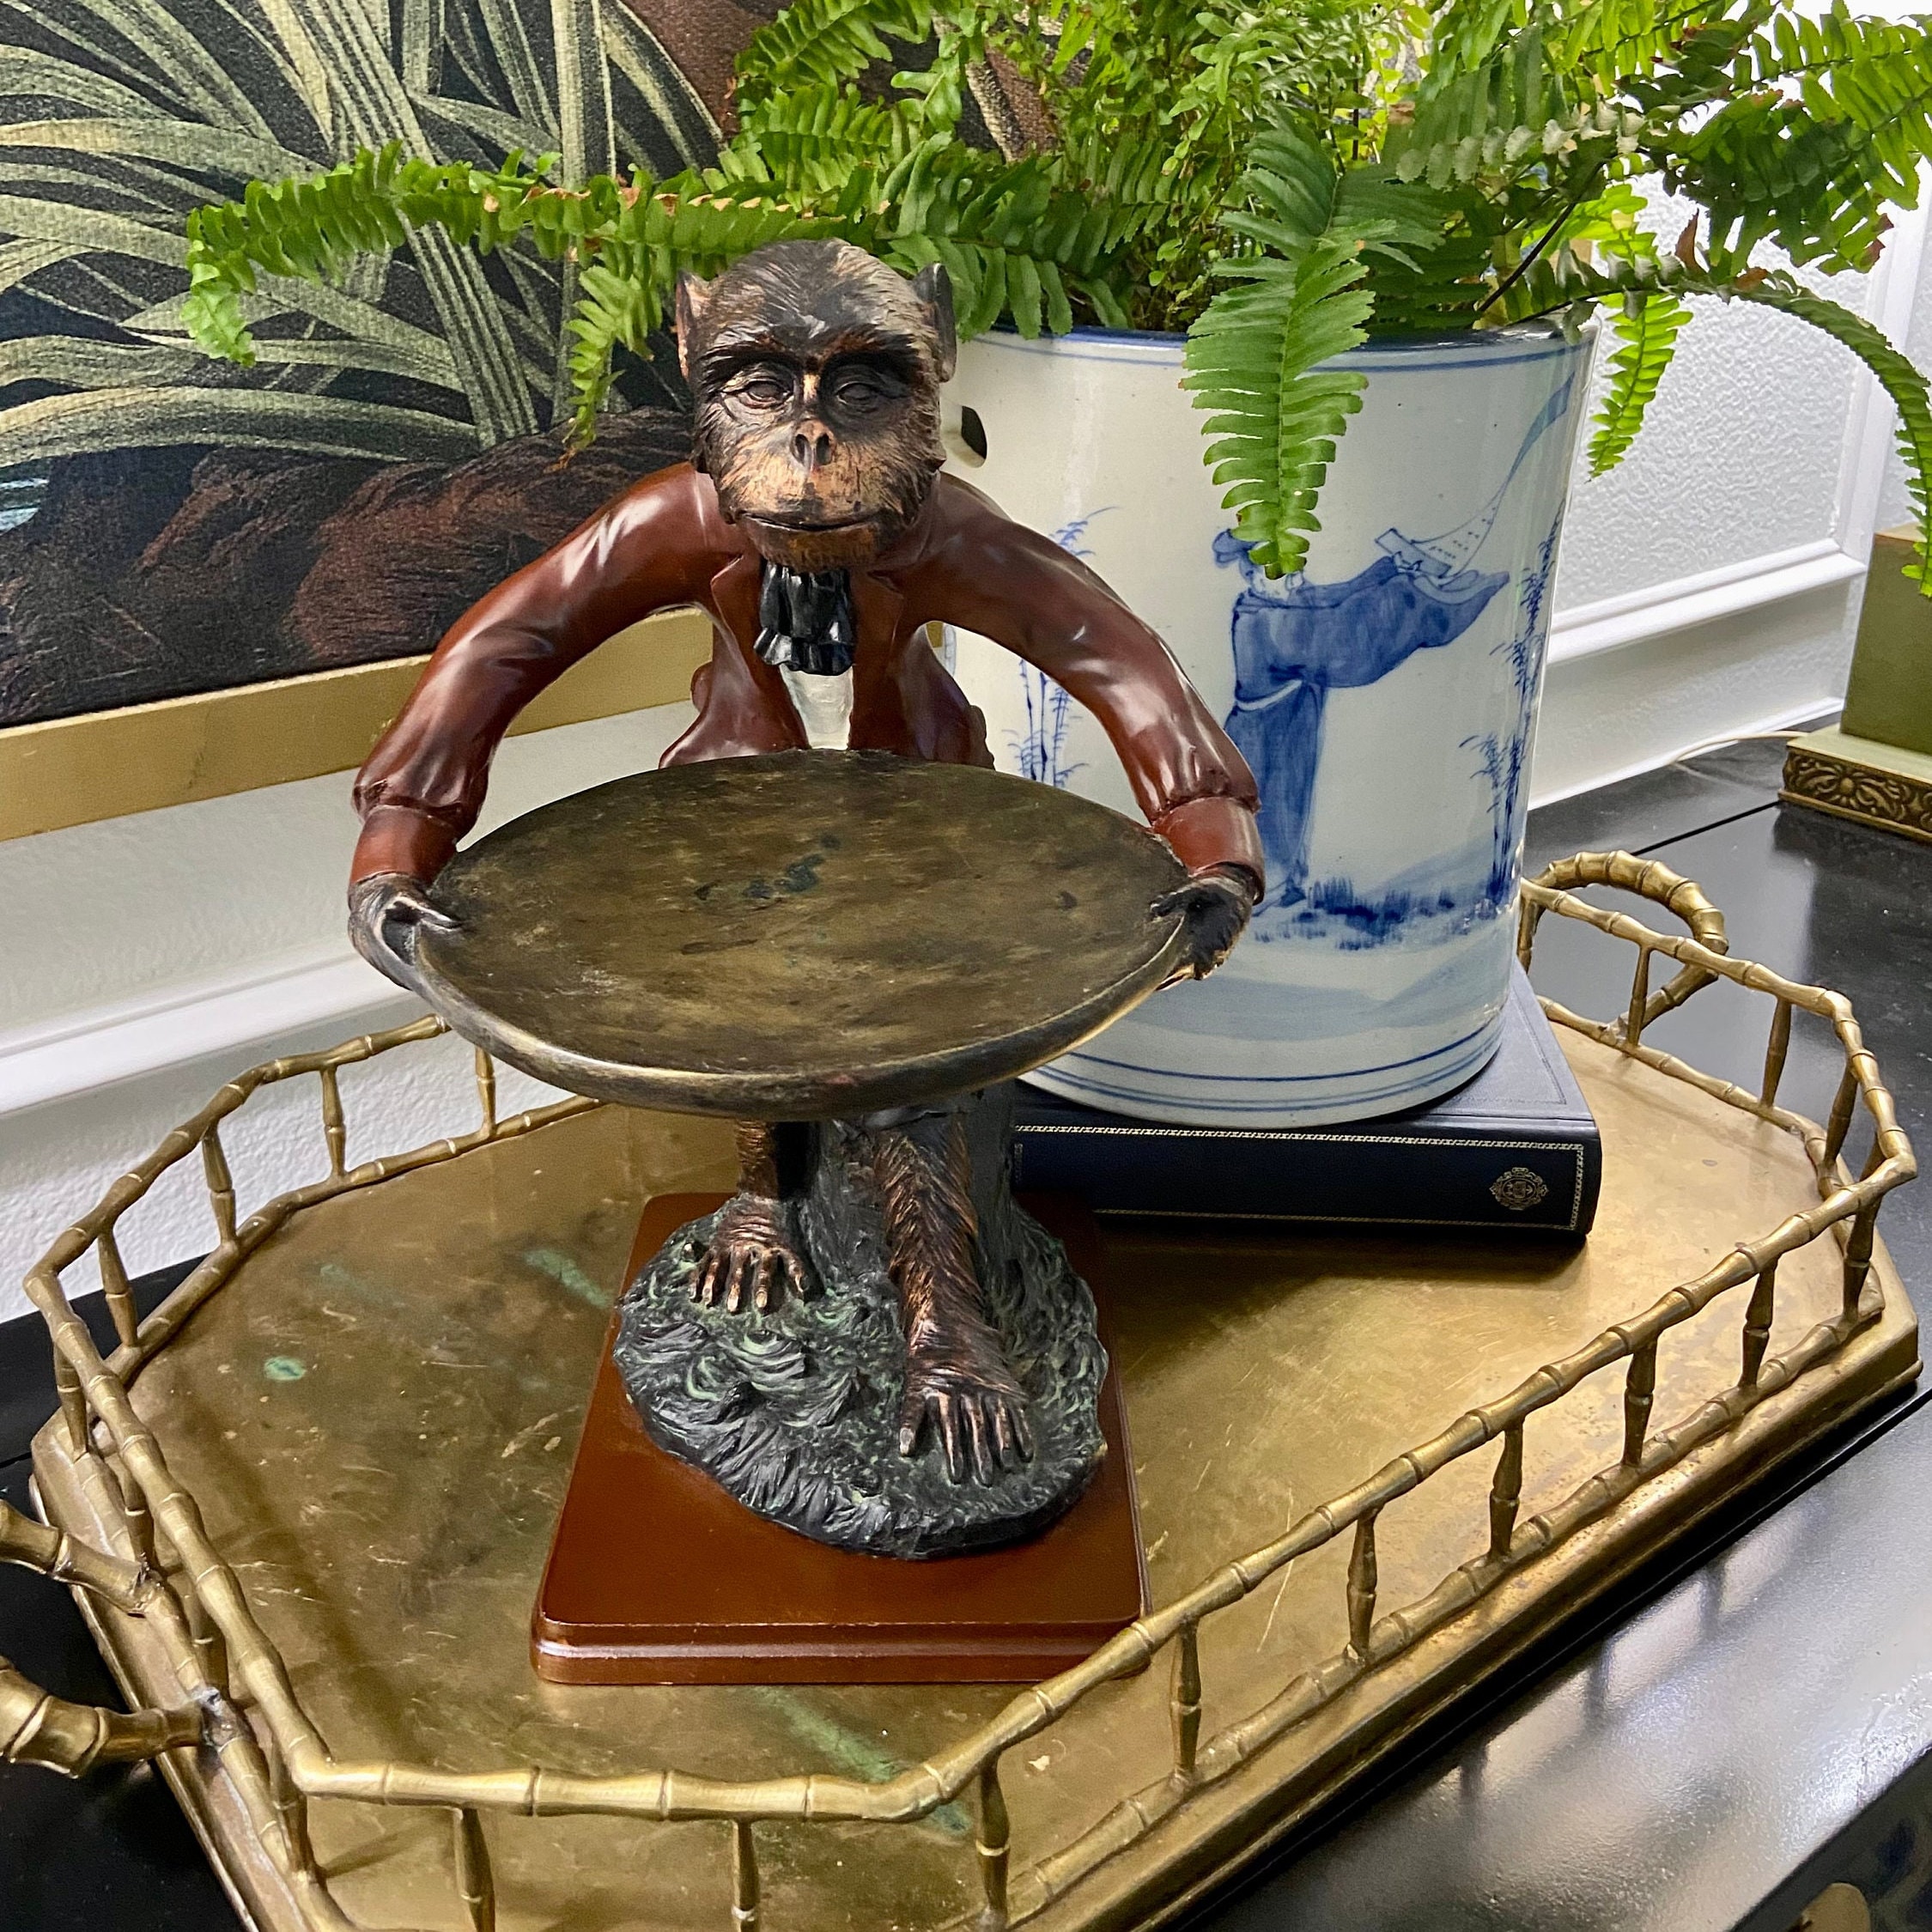 Funny Toilet Paper Holder Monkey Statue -  Norway